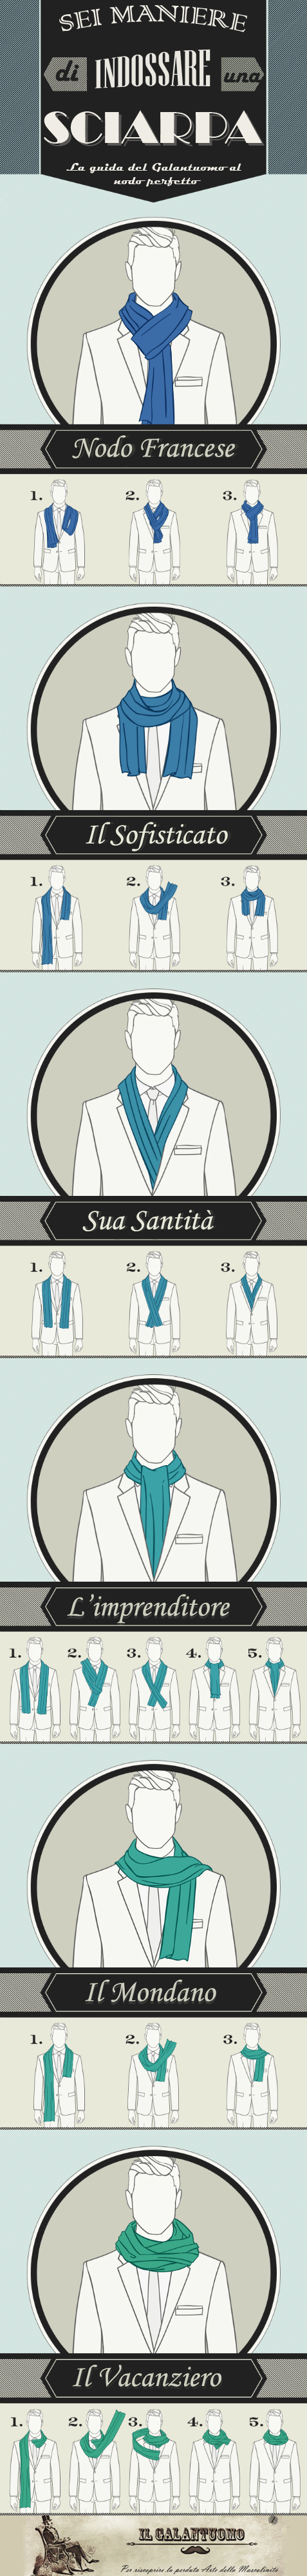 gentlemens-guide-to-scarf-tying_527d8ba4038f4